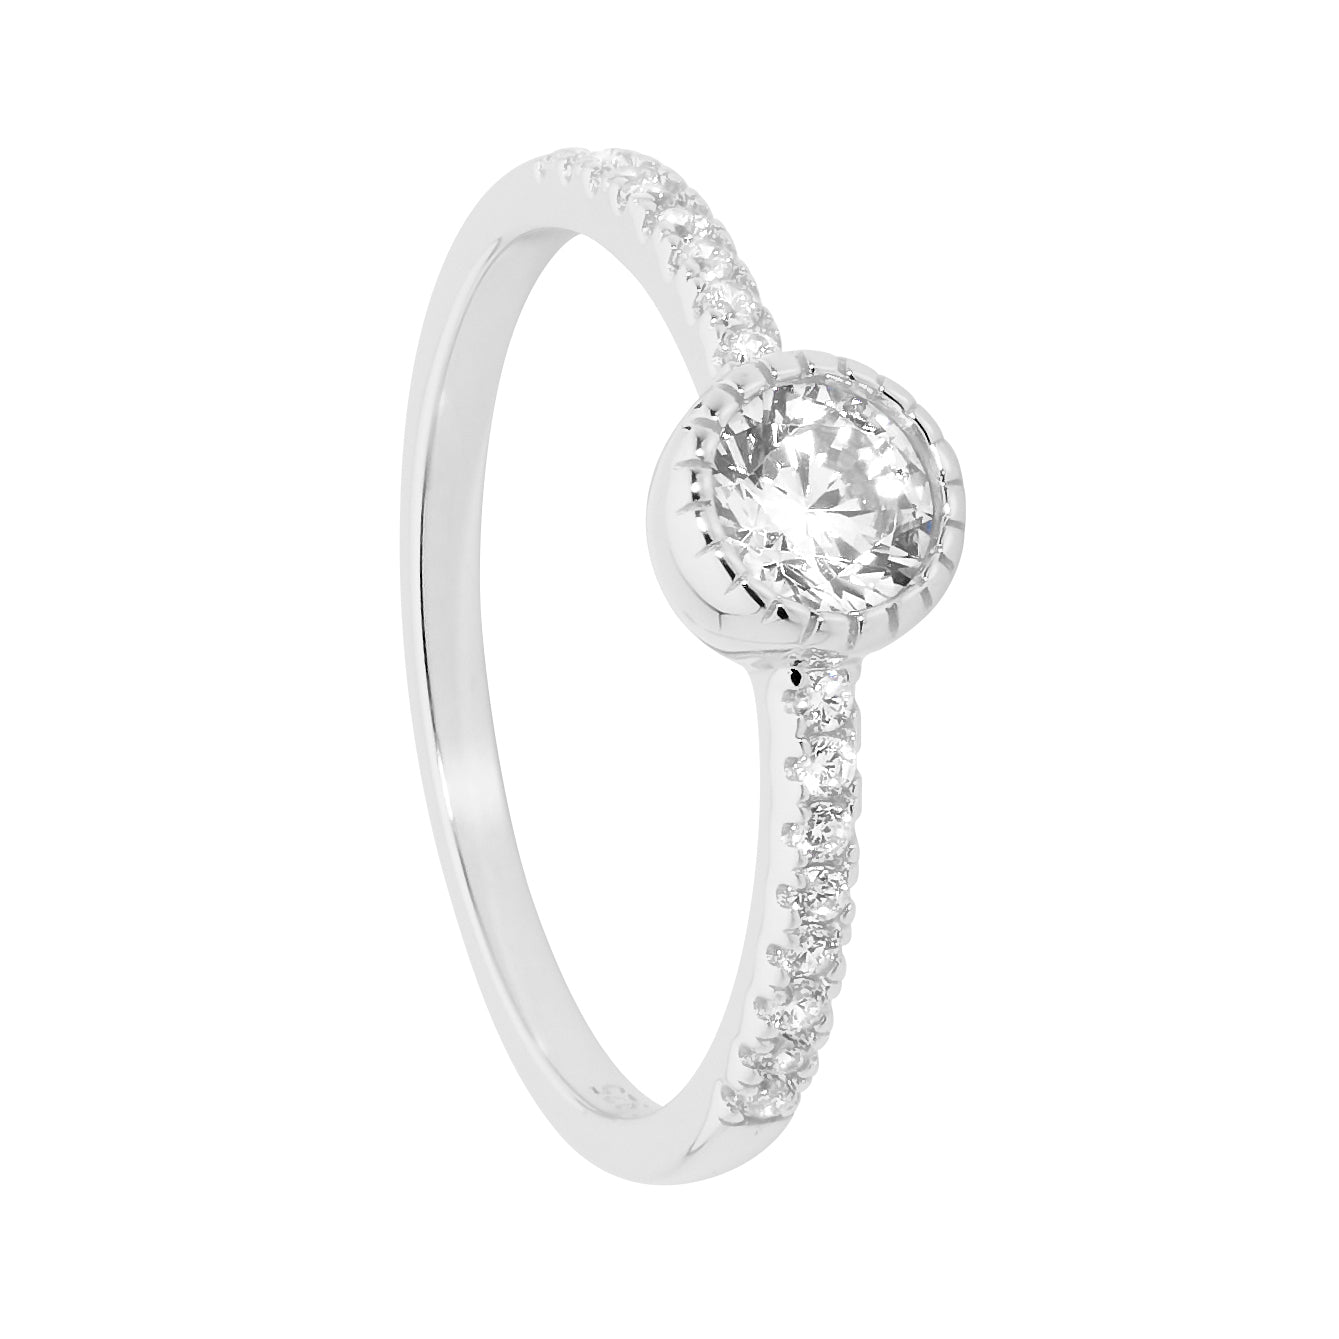 Sterling Silver CZ Solitaire 5mm